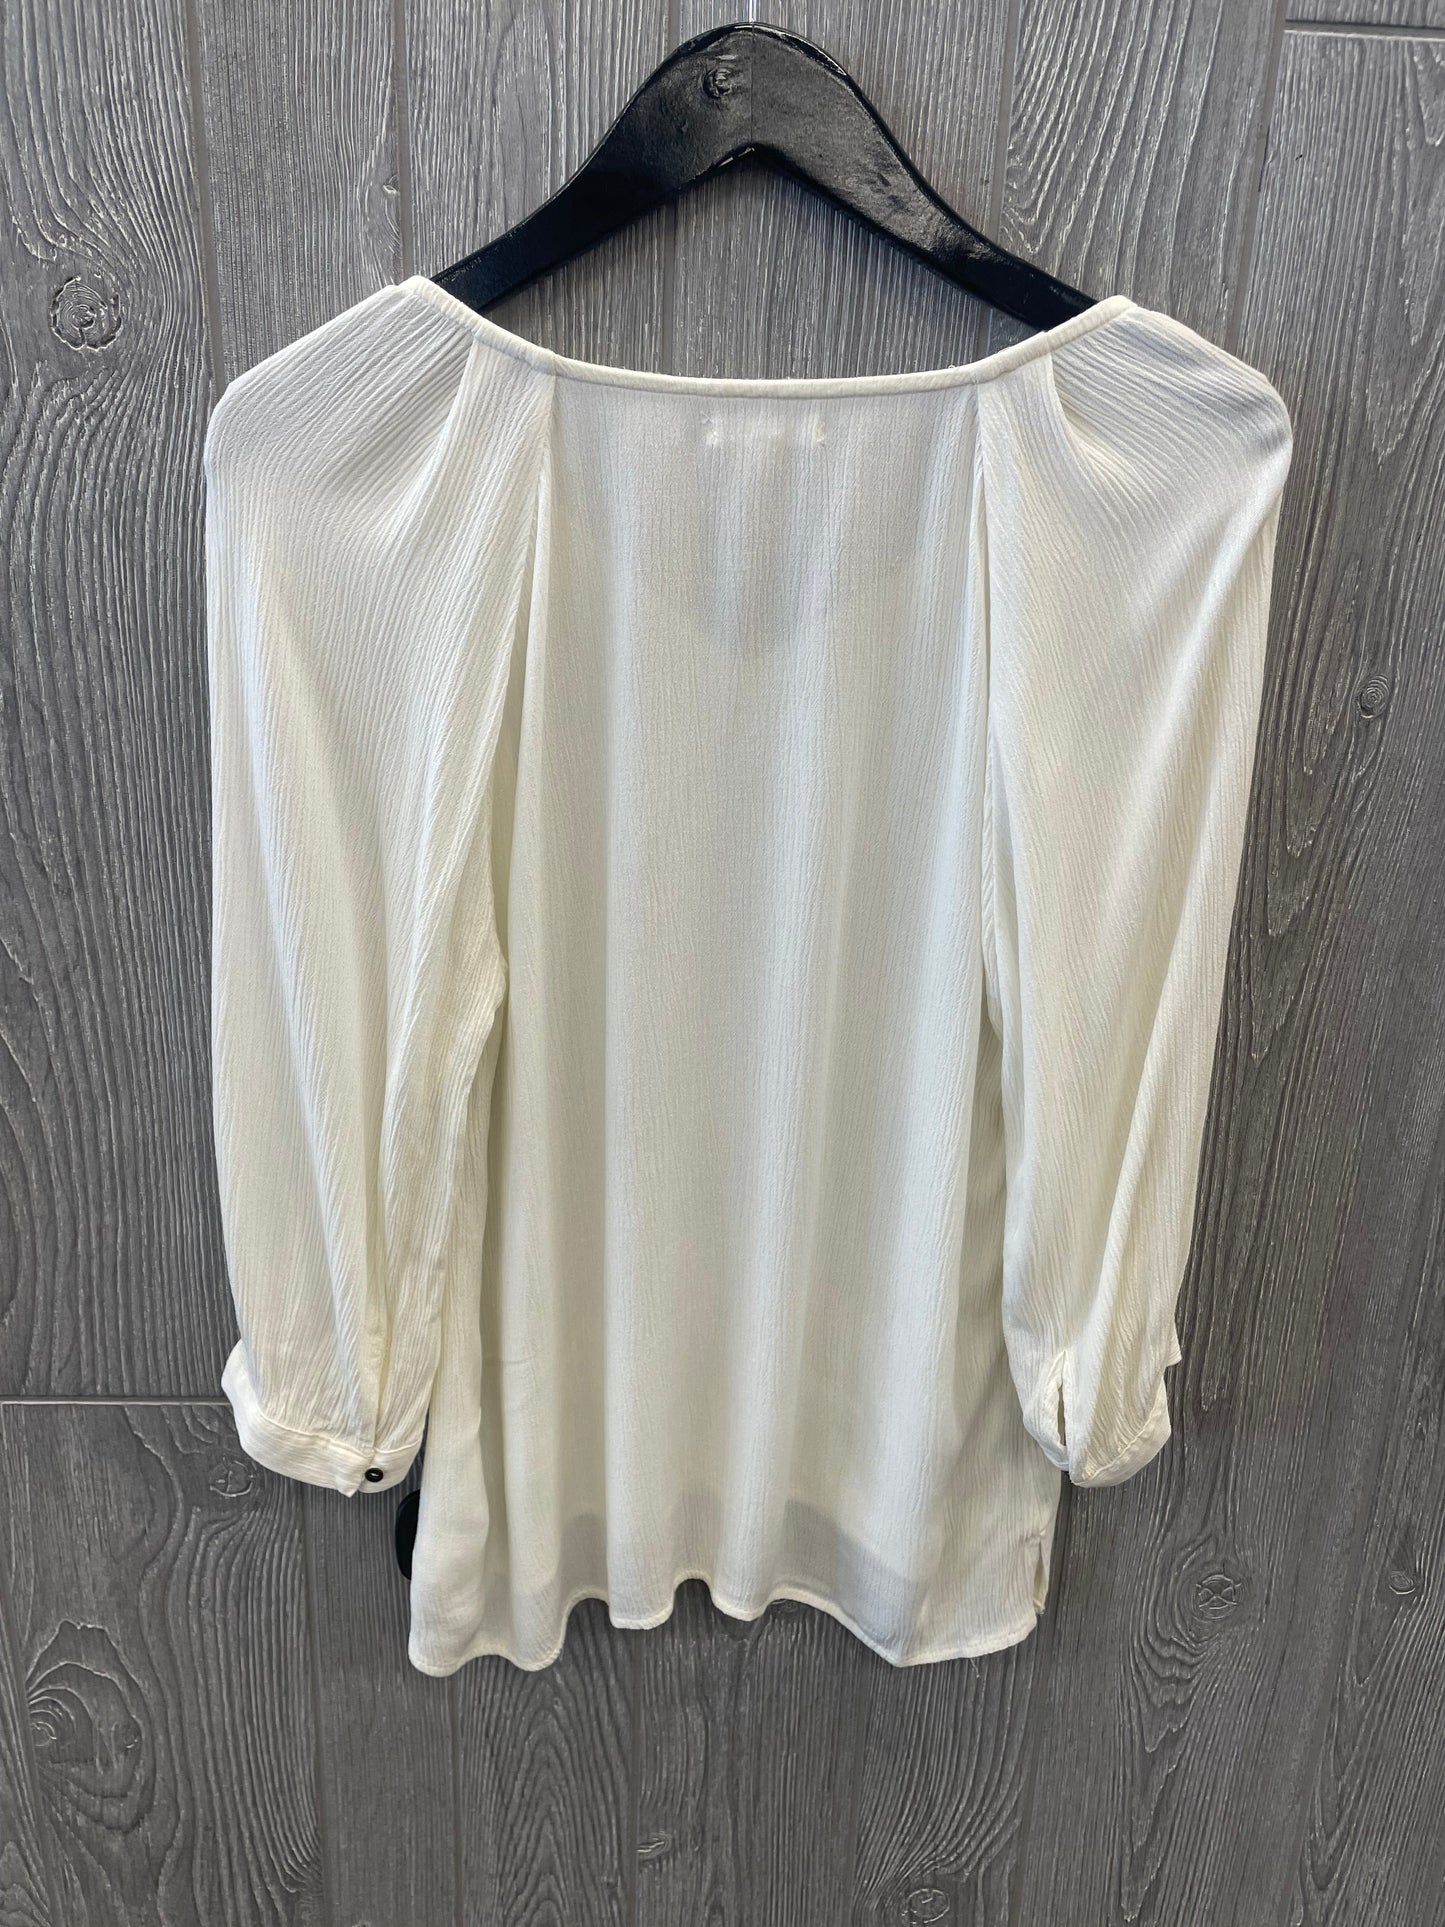 Cream Top Long Sleeve Maurices, Size S